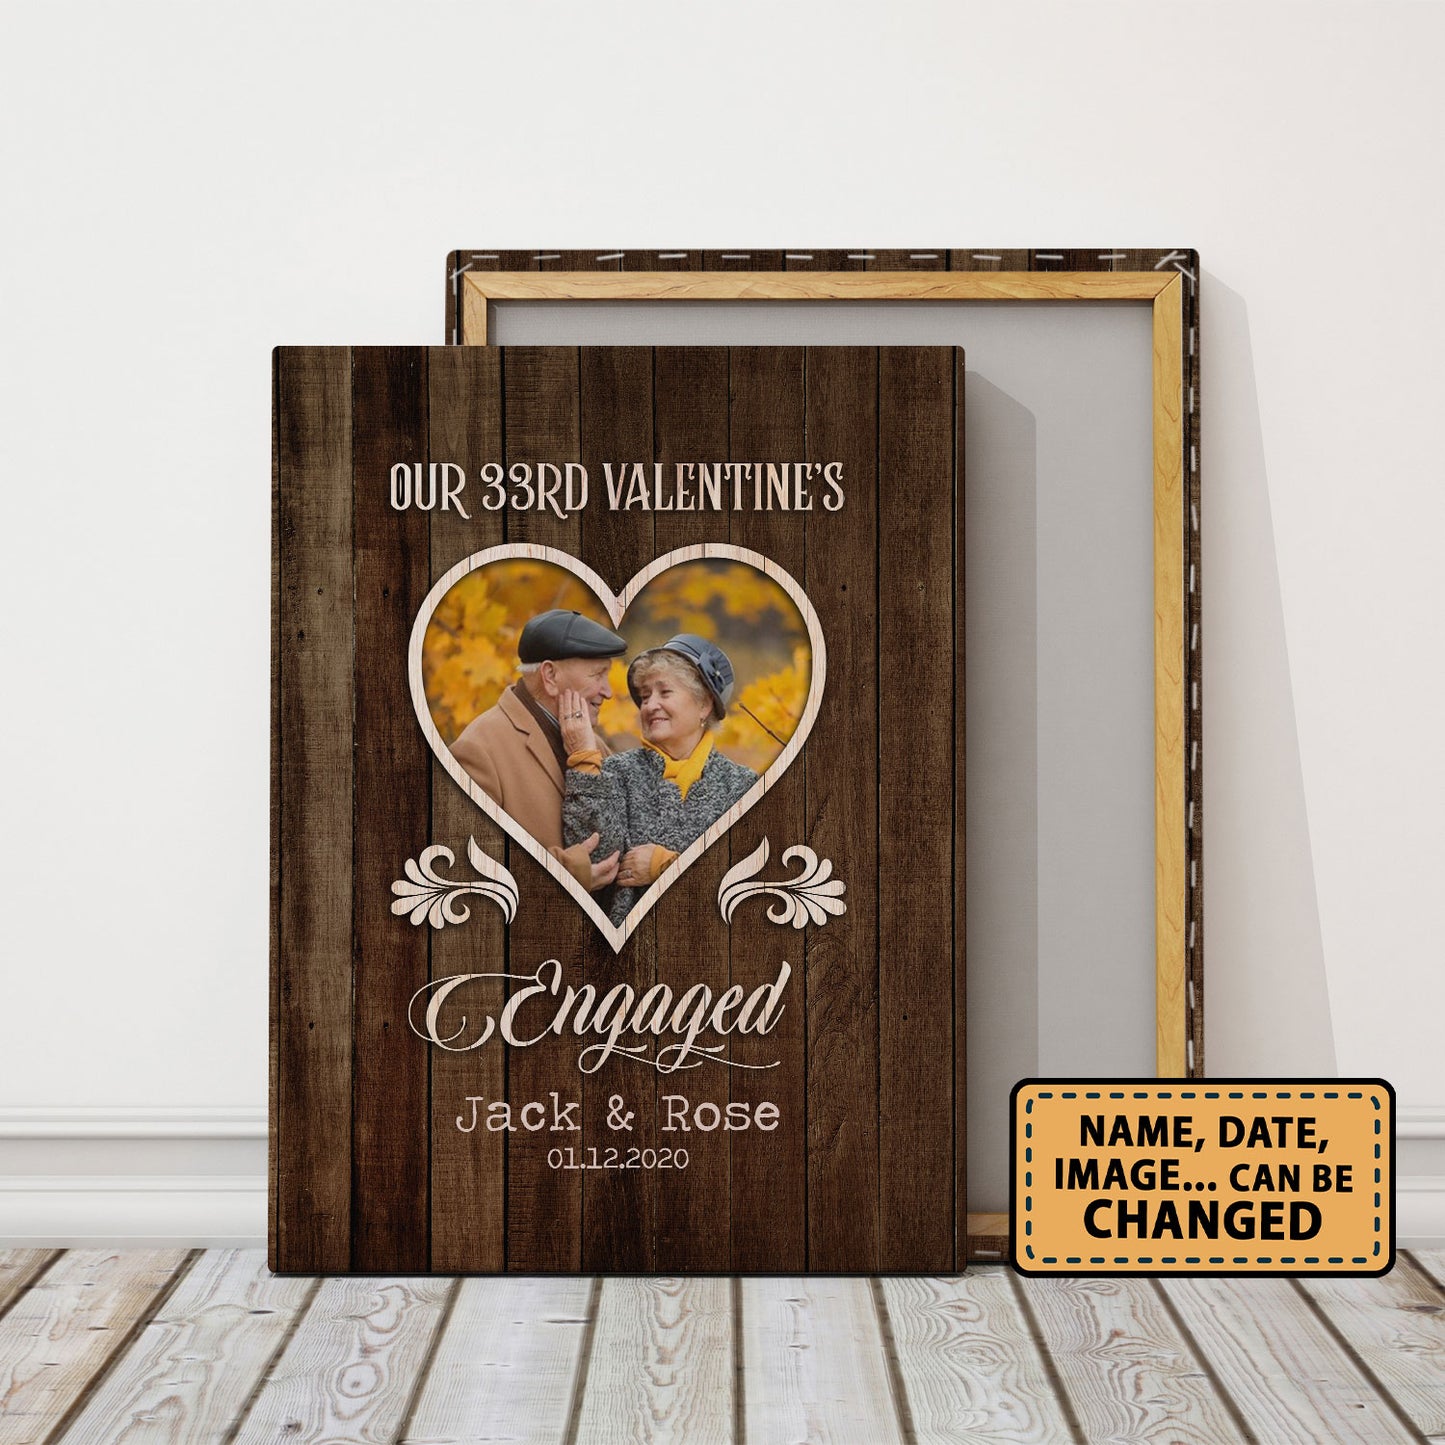 Our 33rd Valentine’s Day Engaged Custom Image Anniversary Canvas